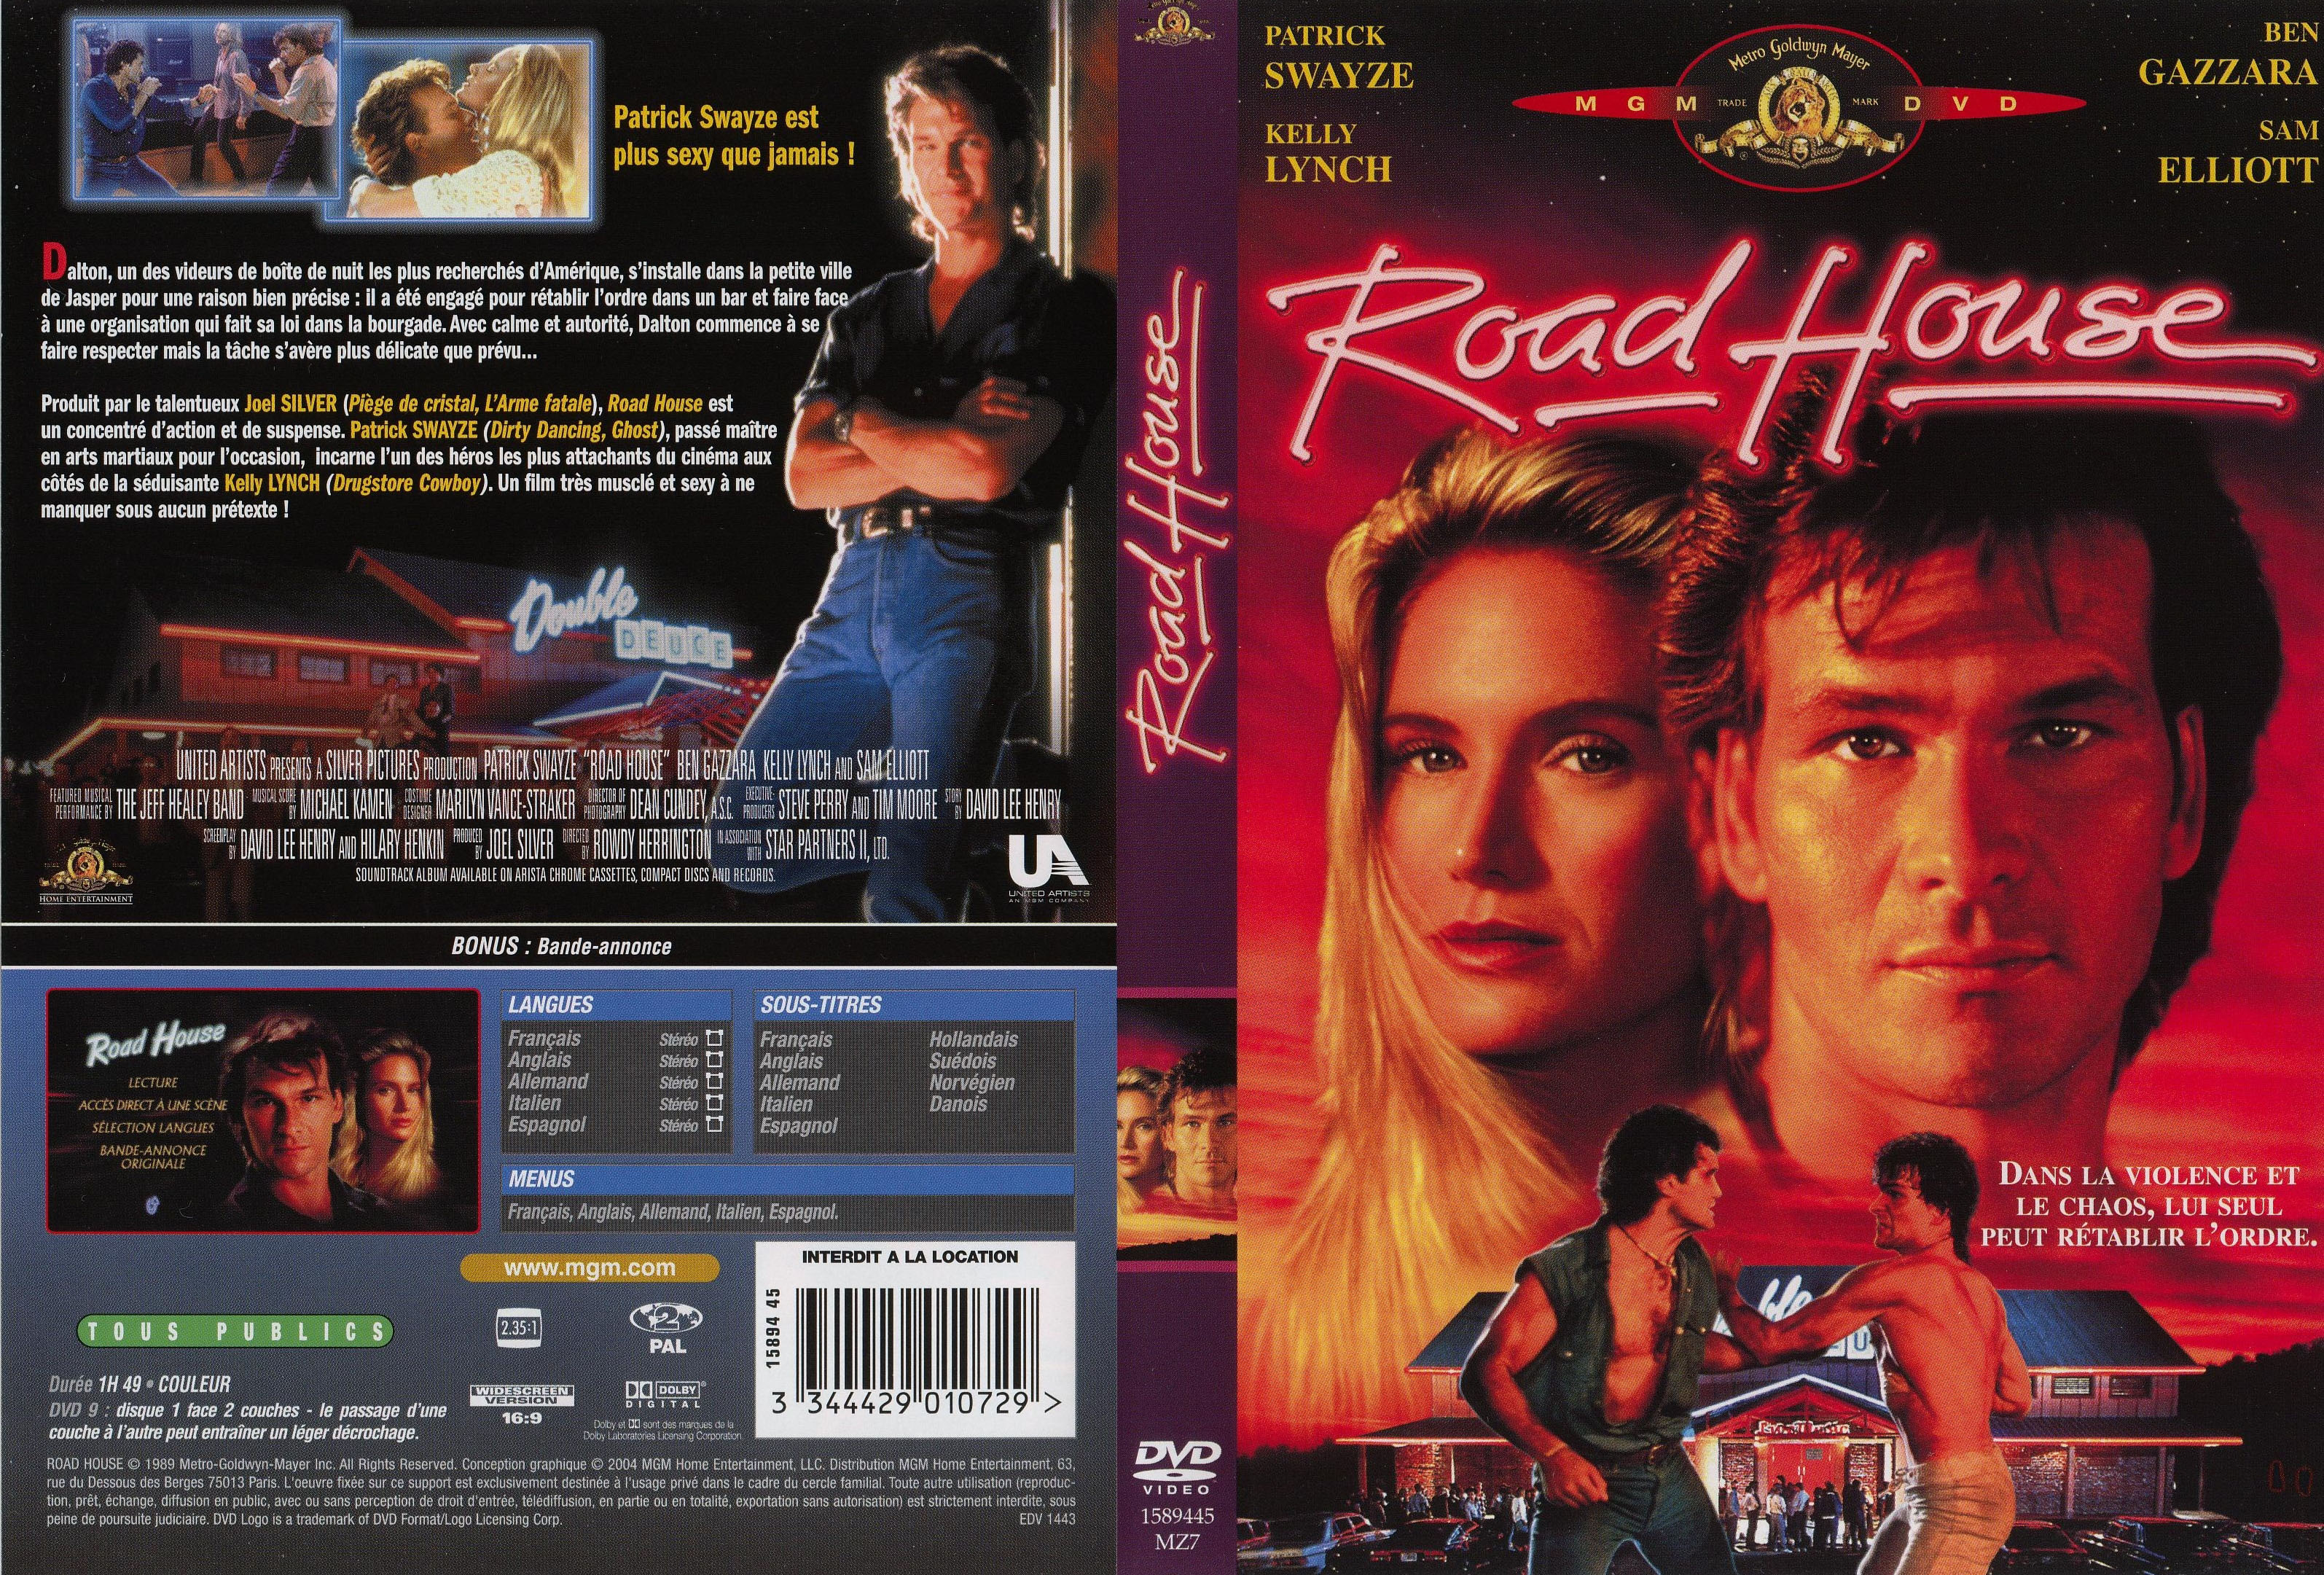 Jaquette DVD Road house